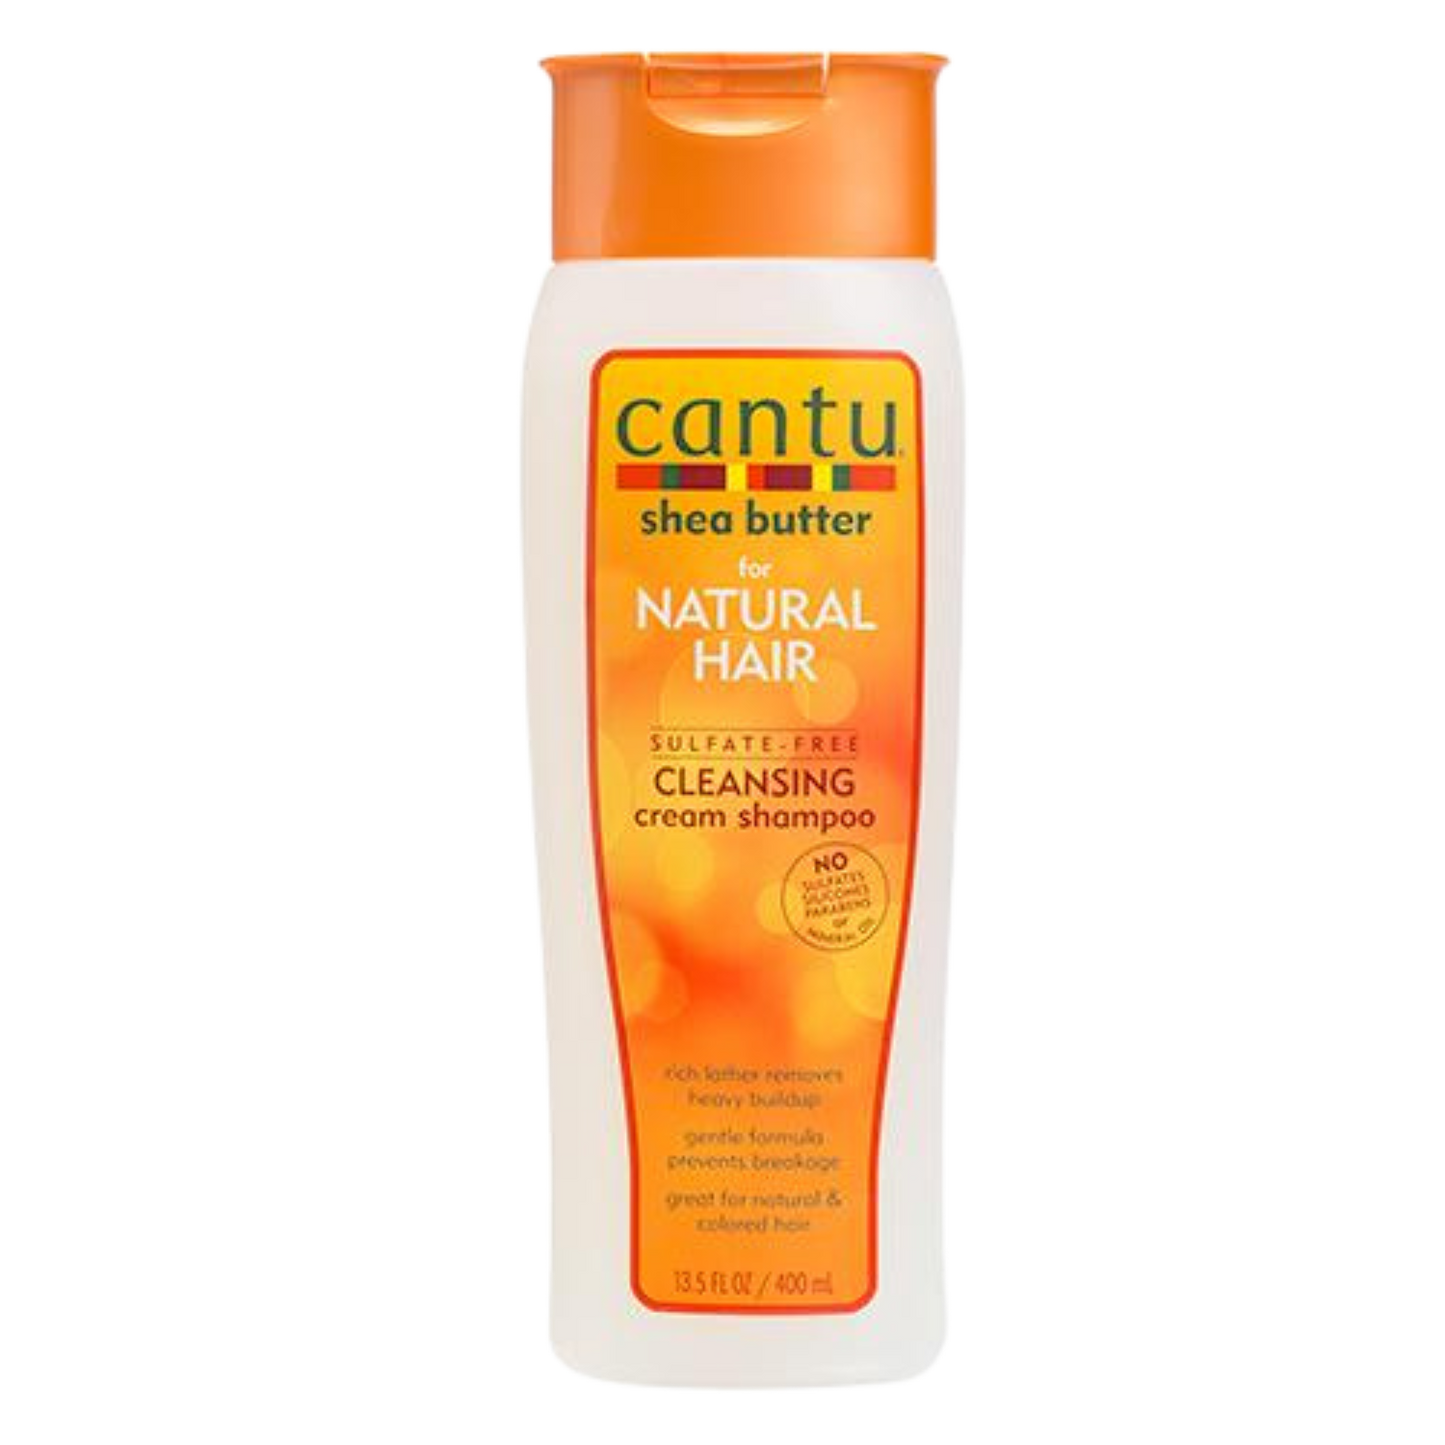 CANTU FOR NATURAL HAIR SULFATE-FREE CLEANSING CREAM SHAMPOO 13.5oz